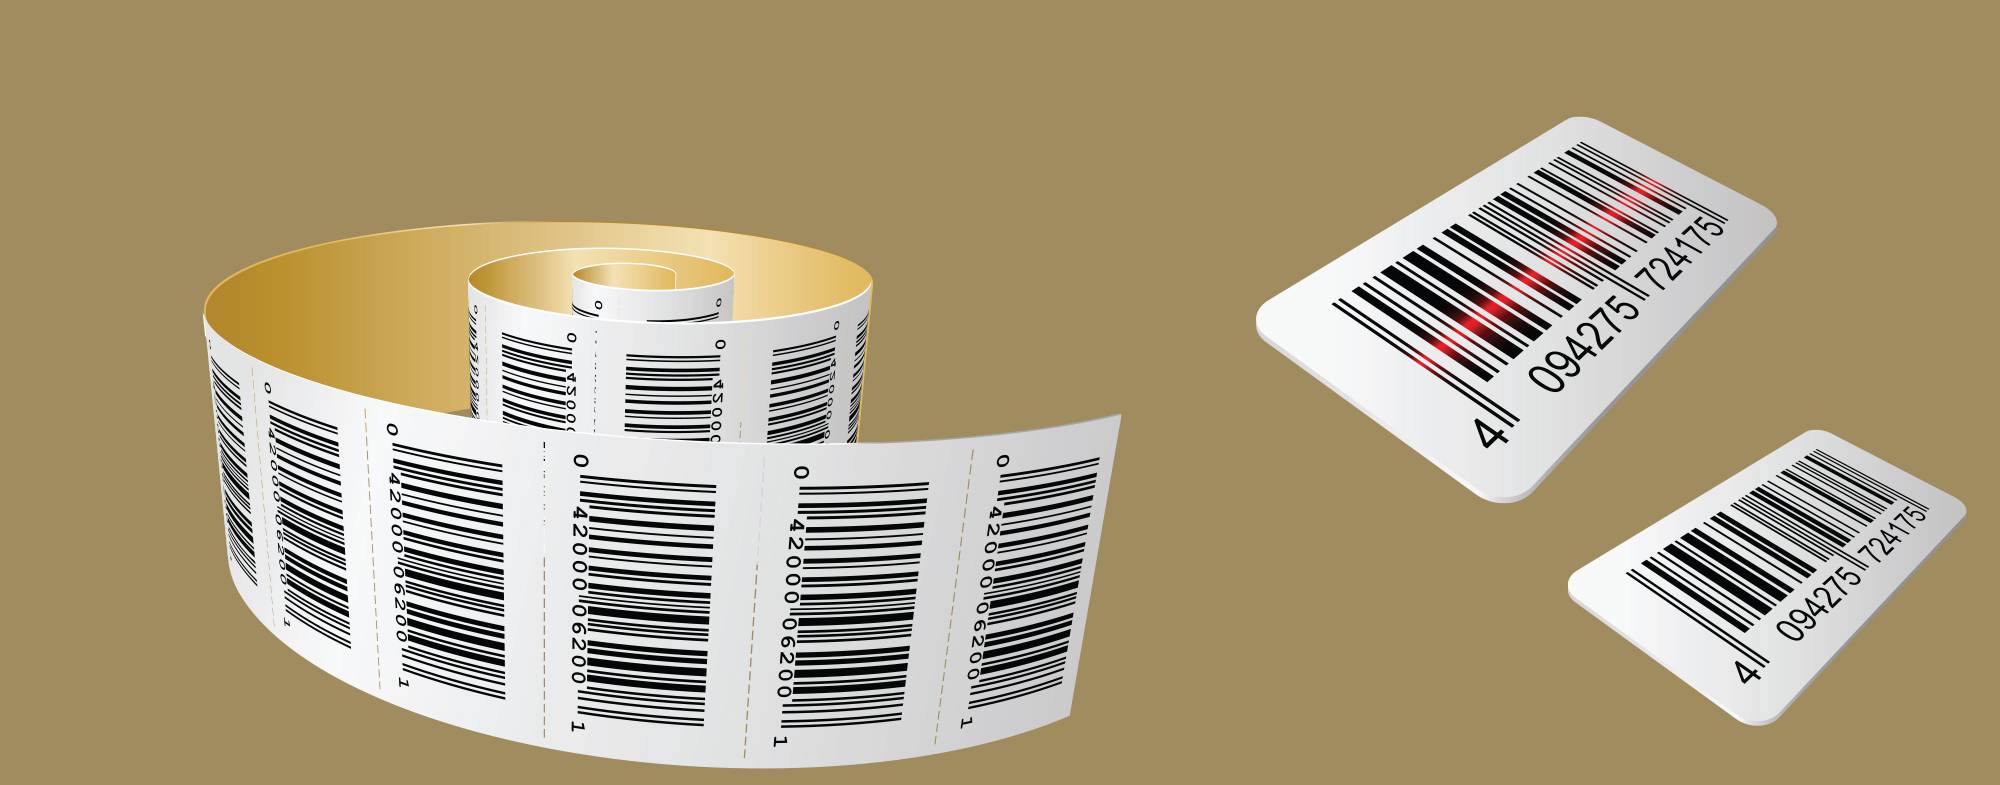 Barcode stickers & barcode labels for asset & inventory management.